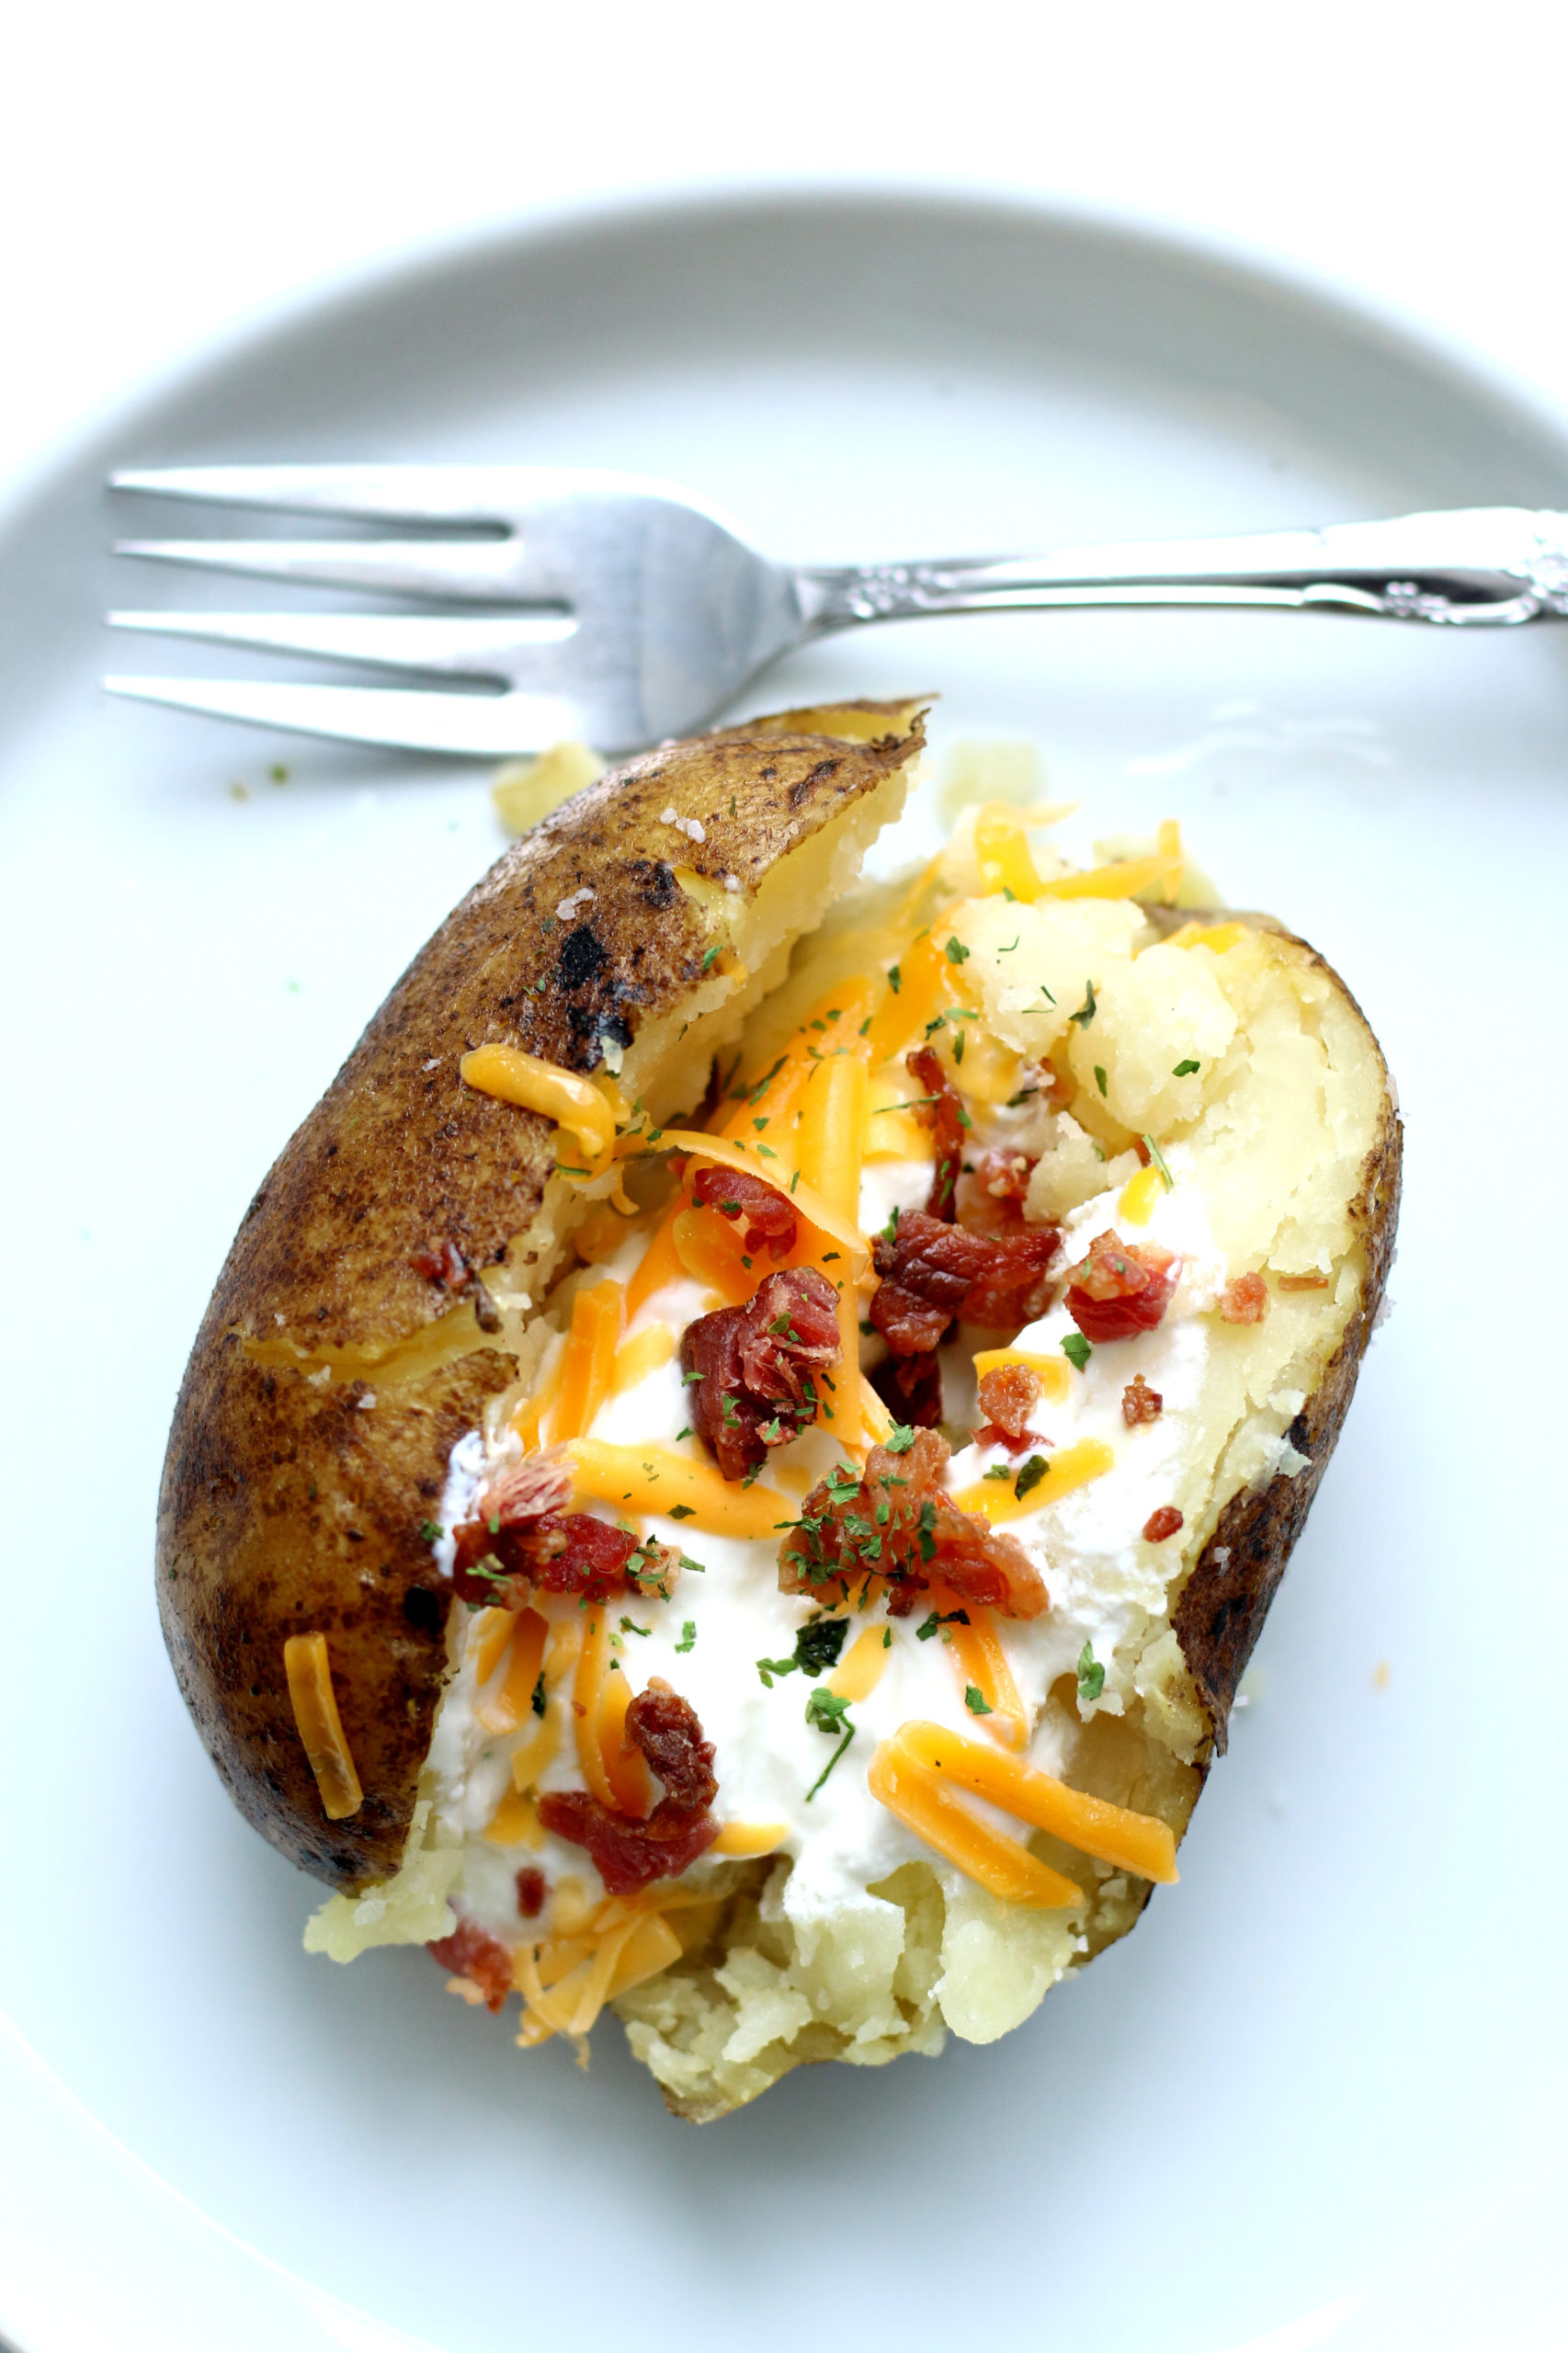 https://www.365daysofcrockpot.com/wp-content/uploads/2020/02/how-to-make-baked-potatoes-in-the-instant-pot-scaled.jpg